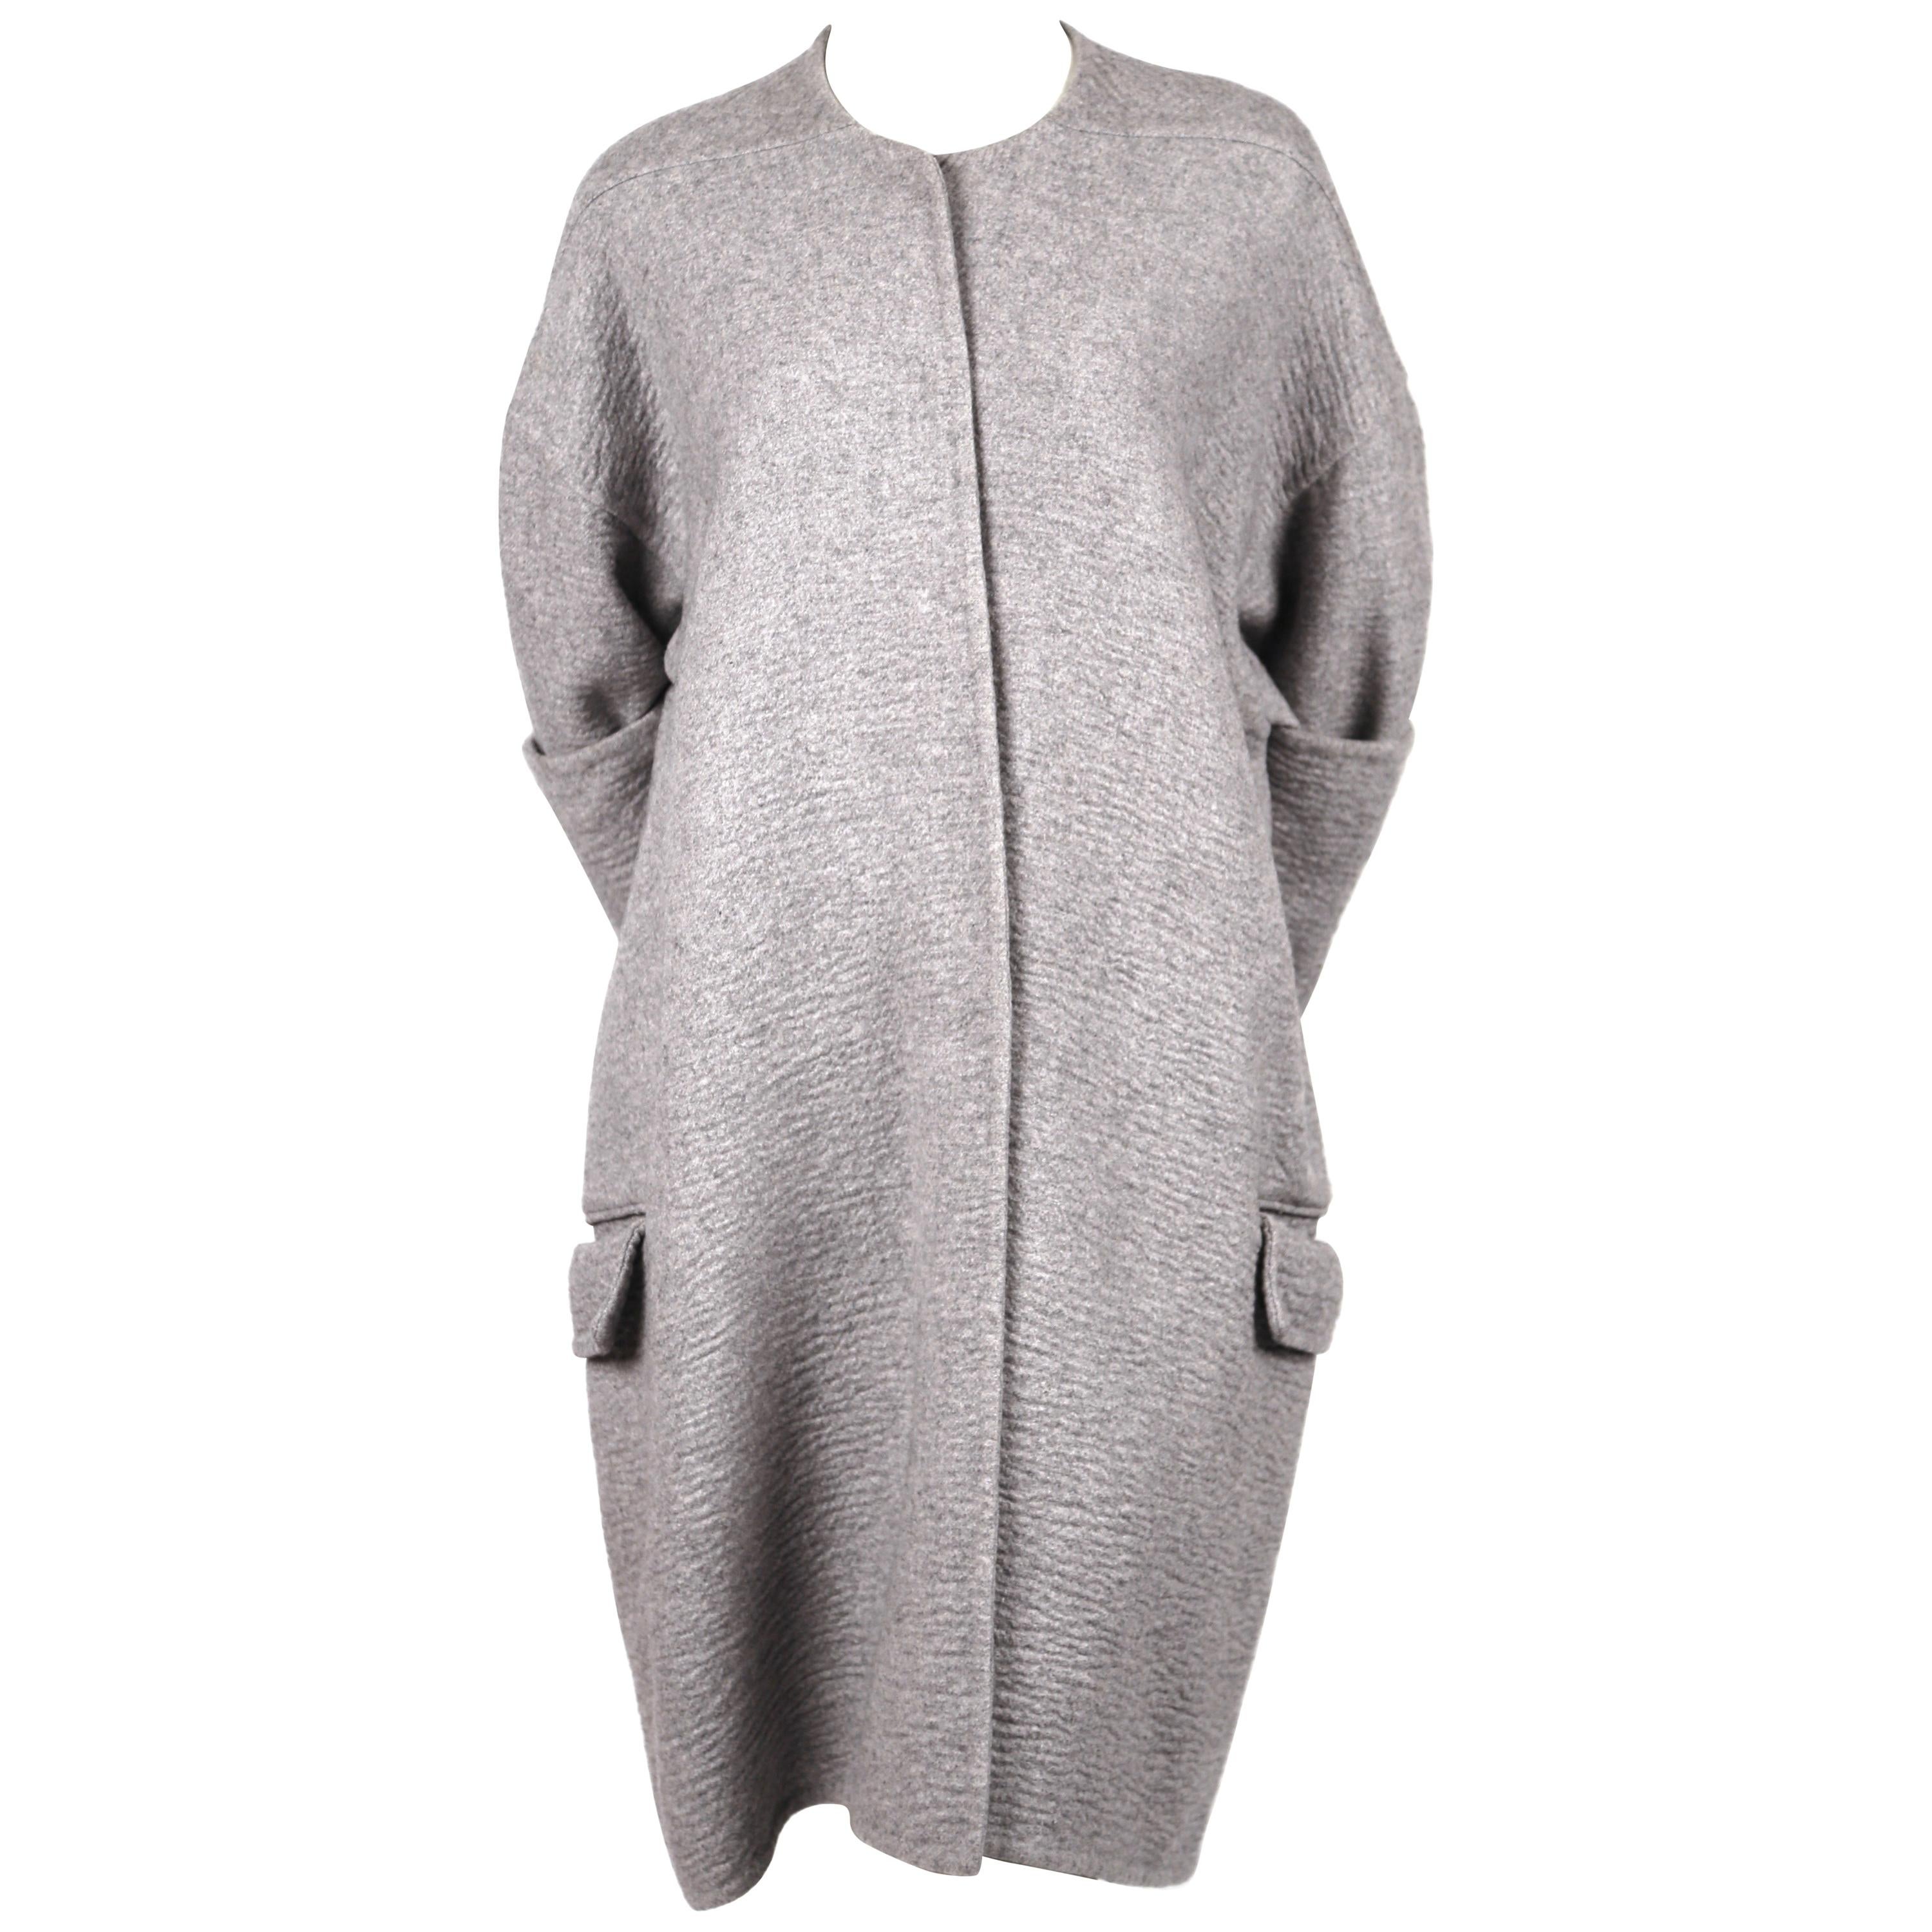 2013 CELINE by PHOEBE PHILO grey cashmere runway coat with exaggerated sleeves